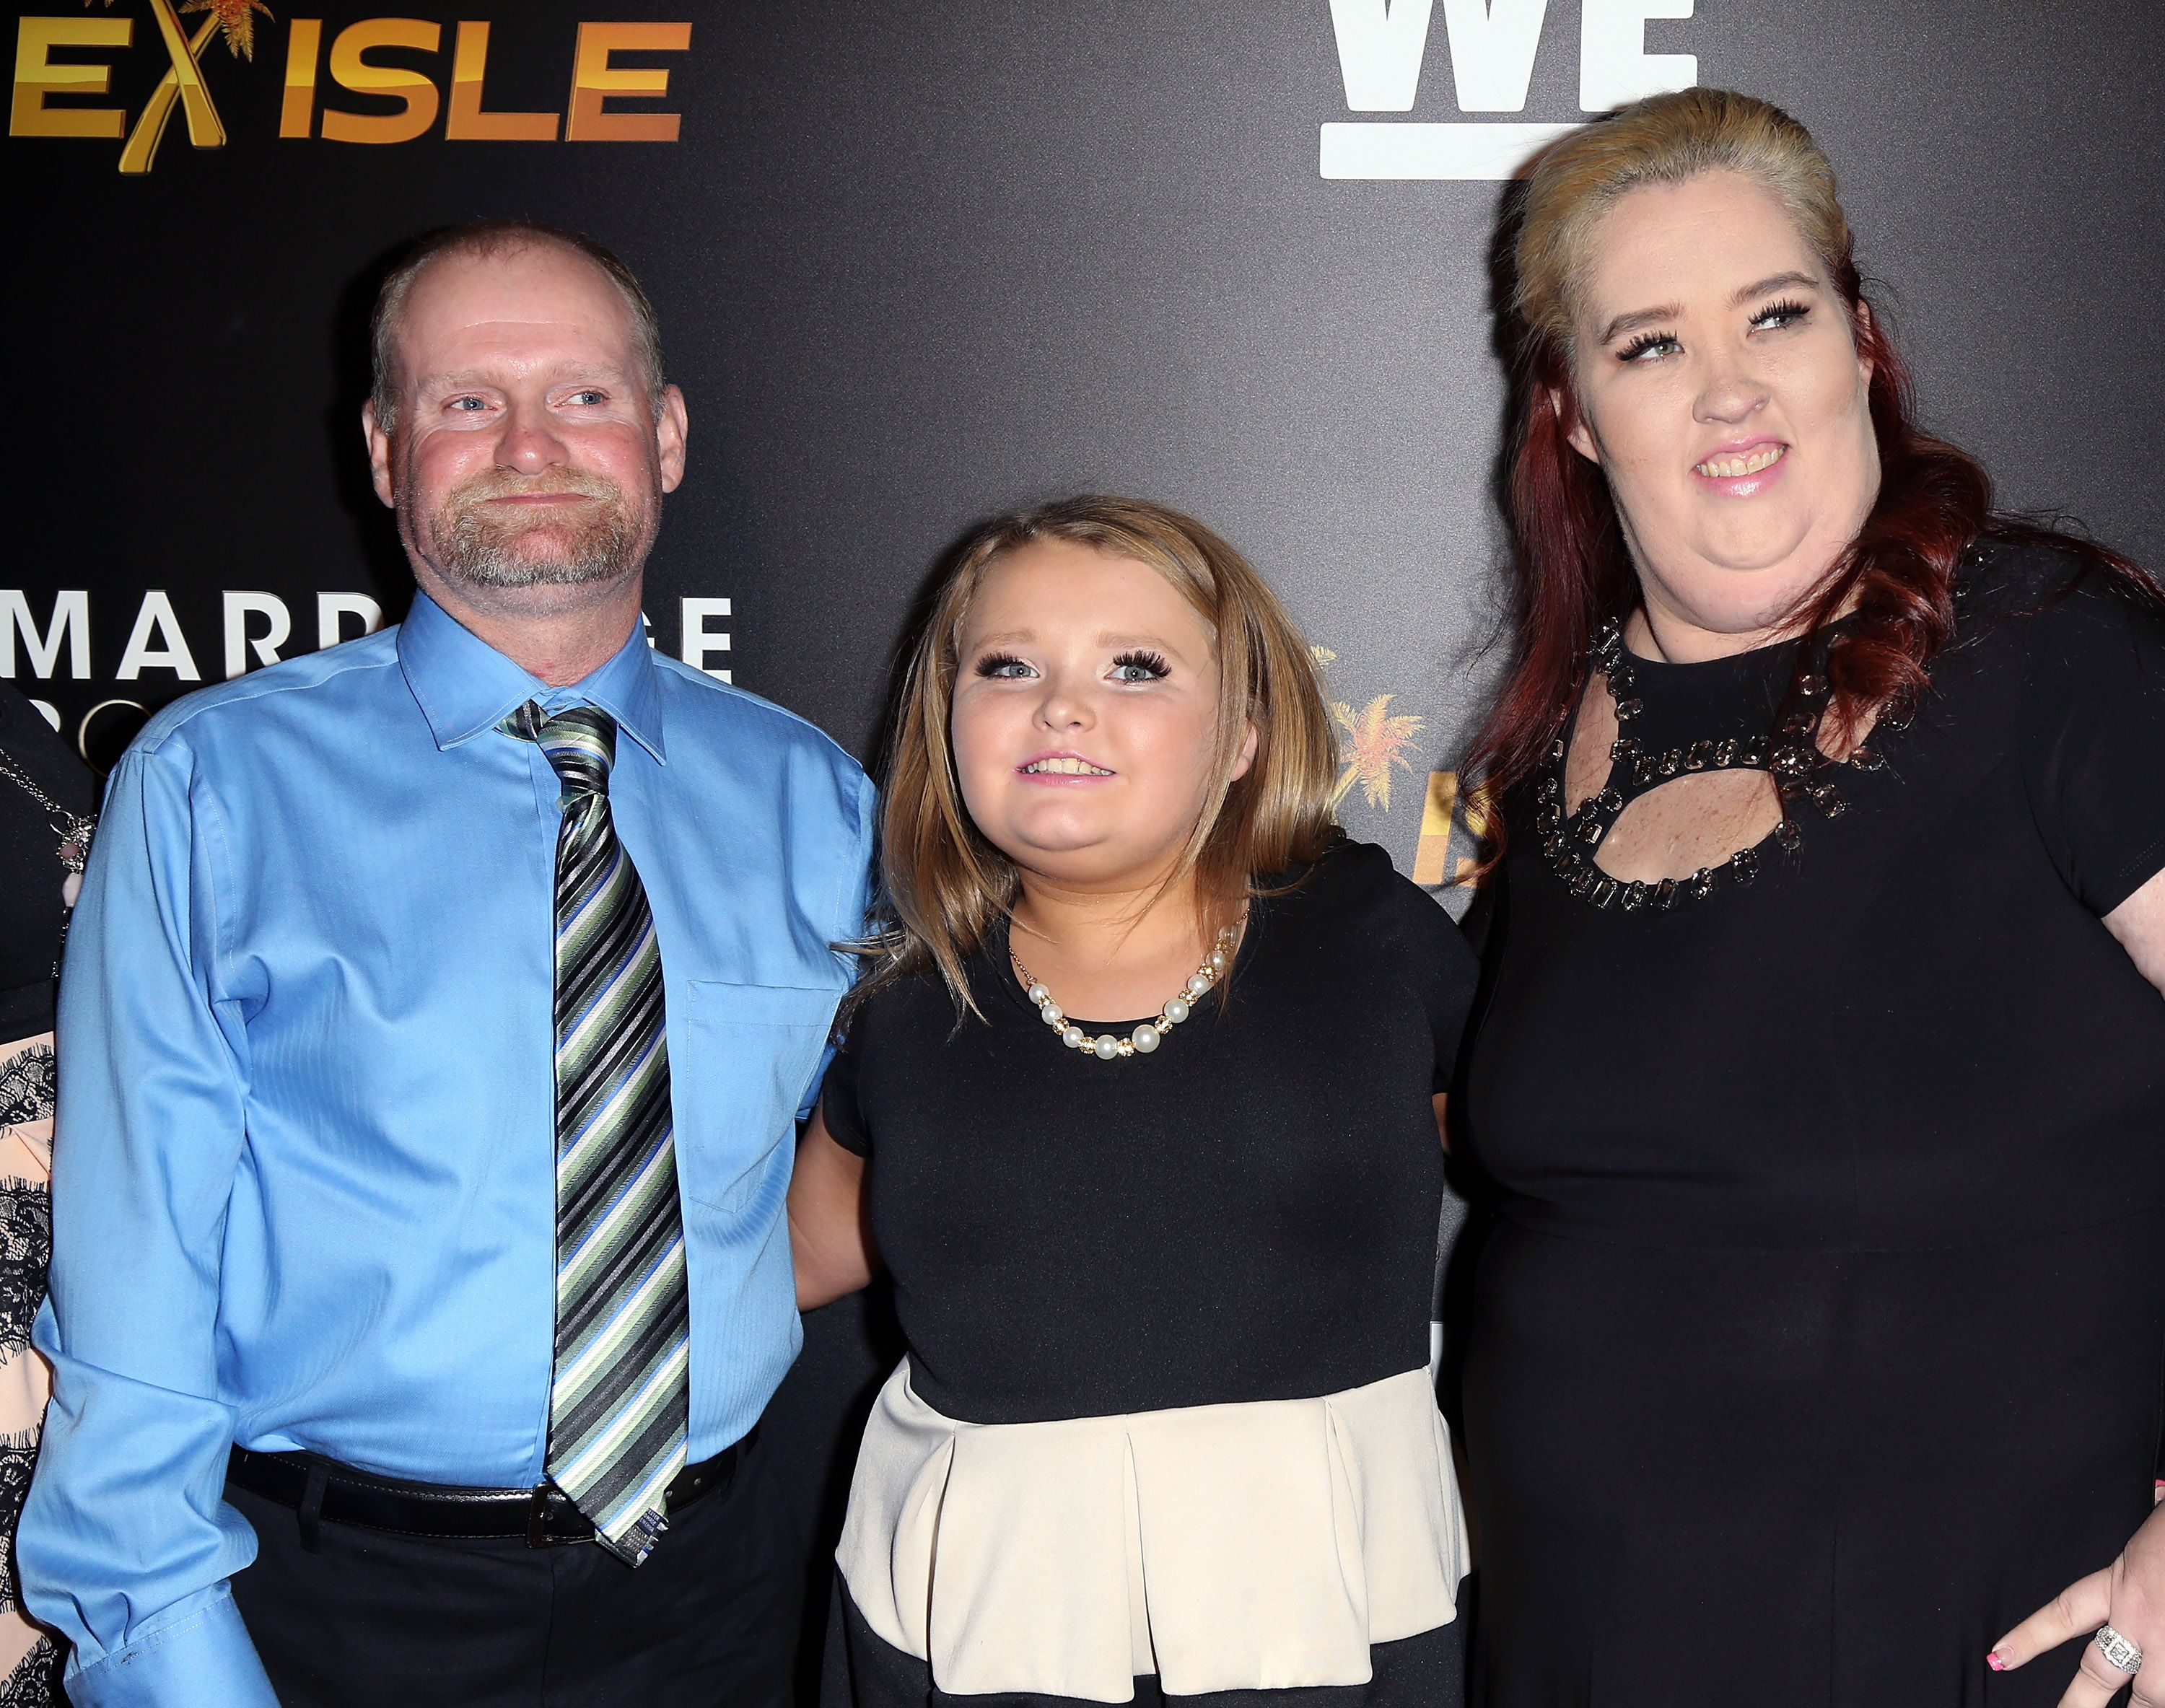 Mama June, Honey Boo Boo and Sugar Bear at the premiere of "Marriage Boot Camp" Reality Stars in 2015 | Source: Getty Images